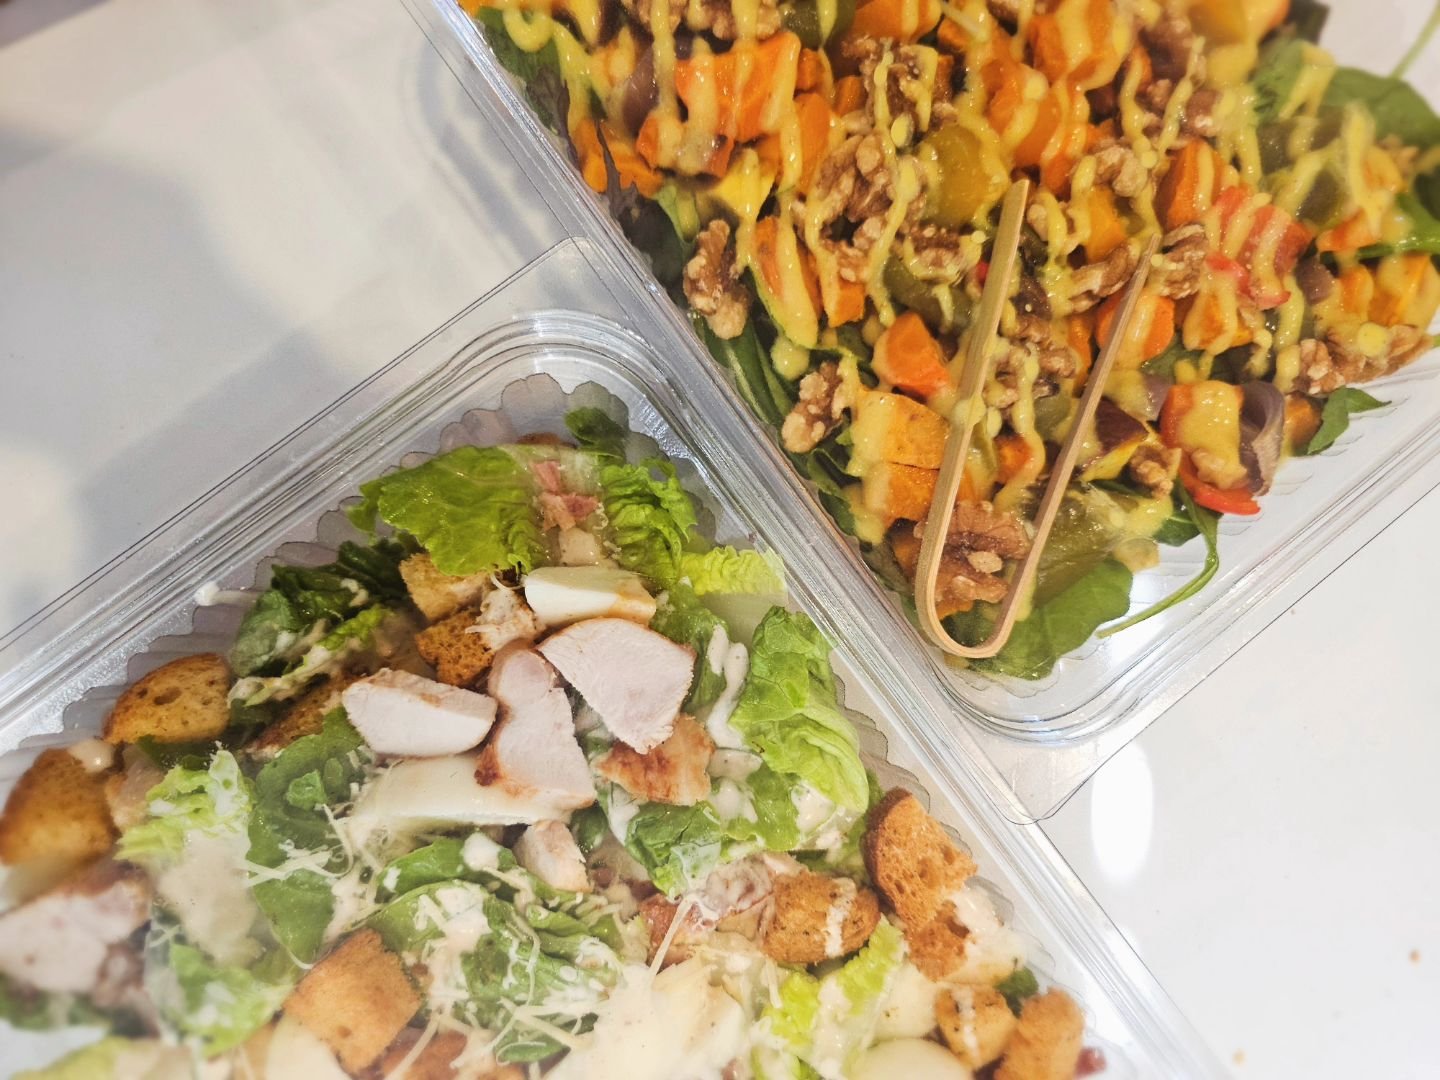 Enjoy the freshness of our vibrant salads! 🥗 Whether as a standalone meal or paired with our irresistible finger foods, they're a must-have for any occasion. Bring the garden-fresh goodness to your backyard events. 🌿